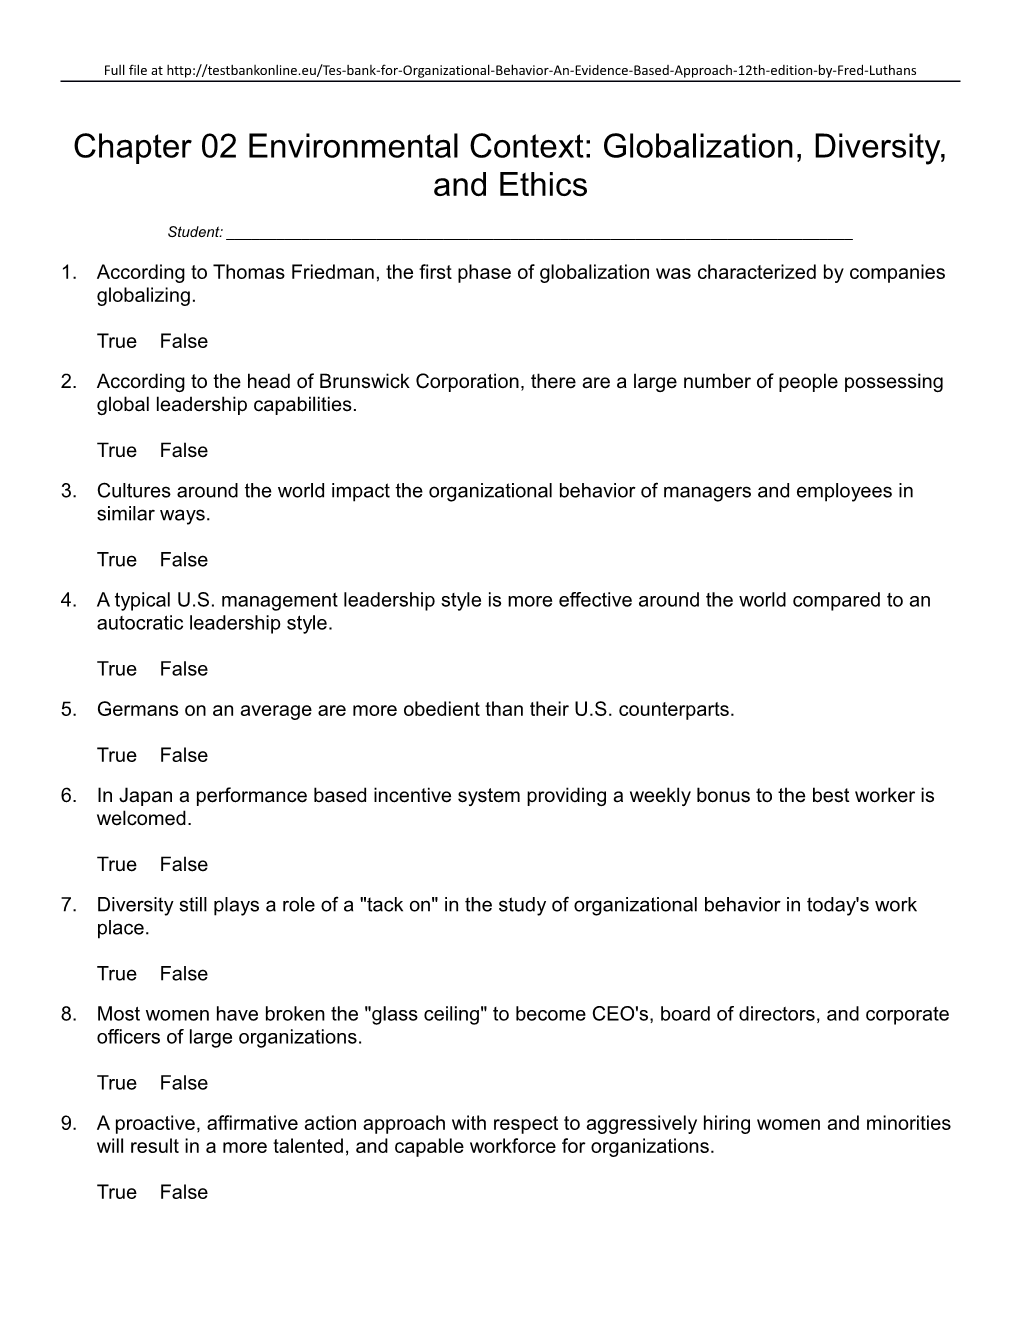 Chapter 02 Environmental Context: Globalization, Diversity, and Ethics